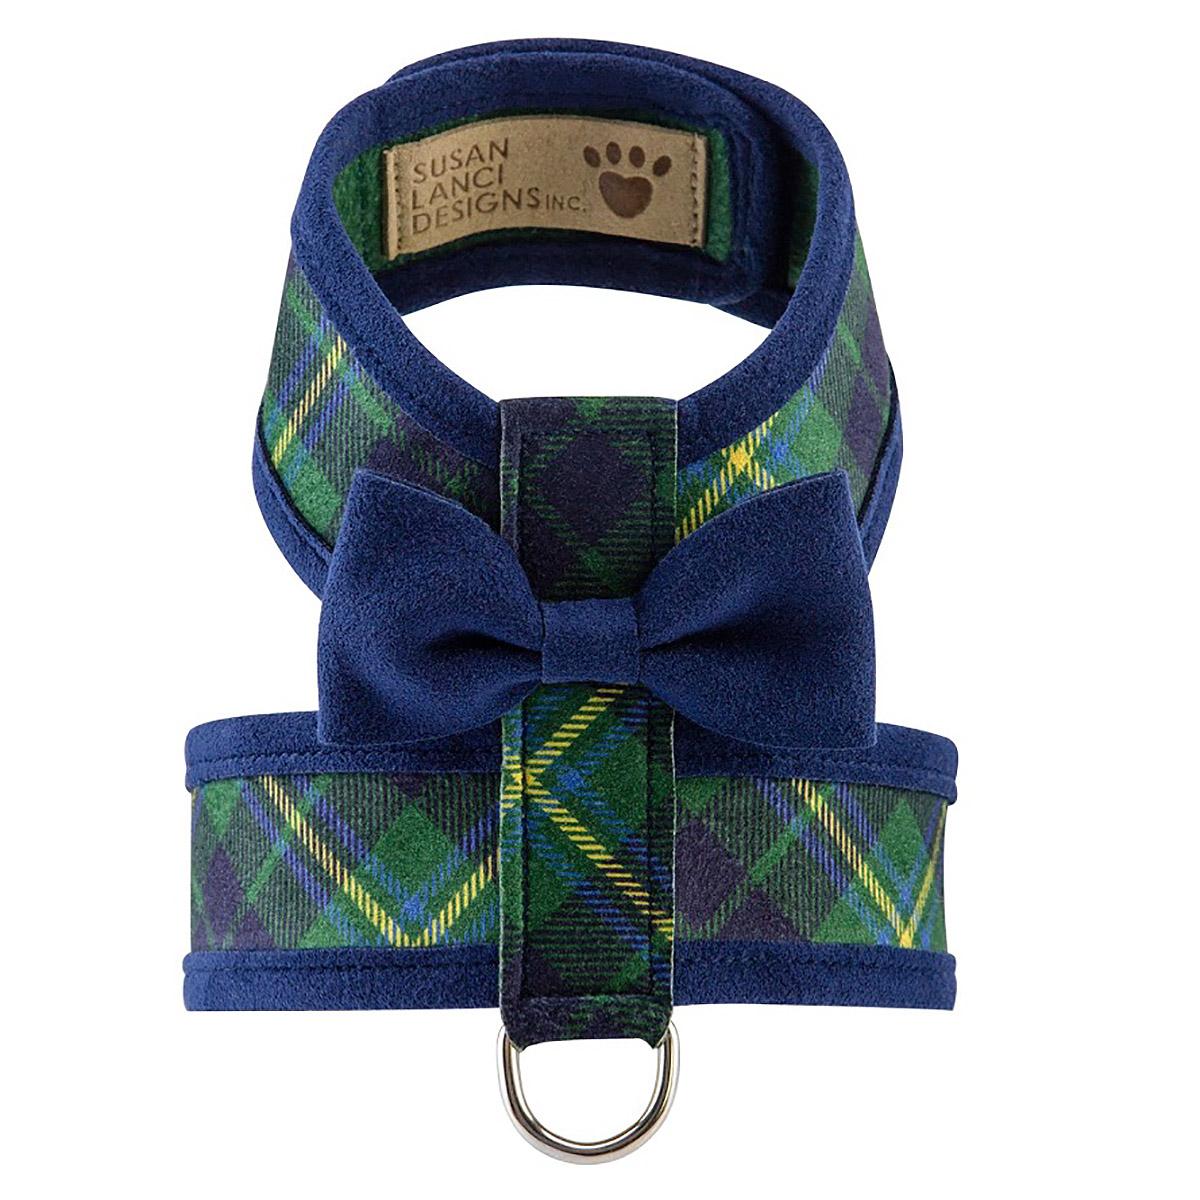 Scotty Tinkie Two-Tone Dog Harness by Susan Lanci - Forest Plaid